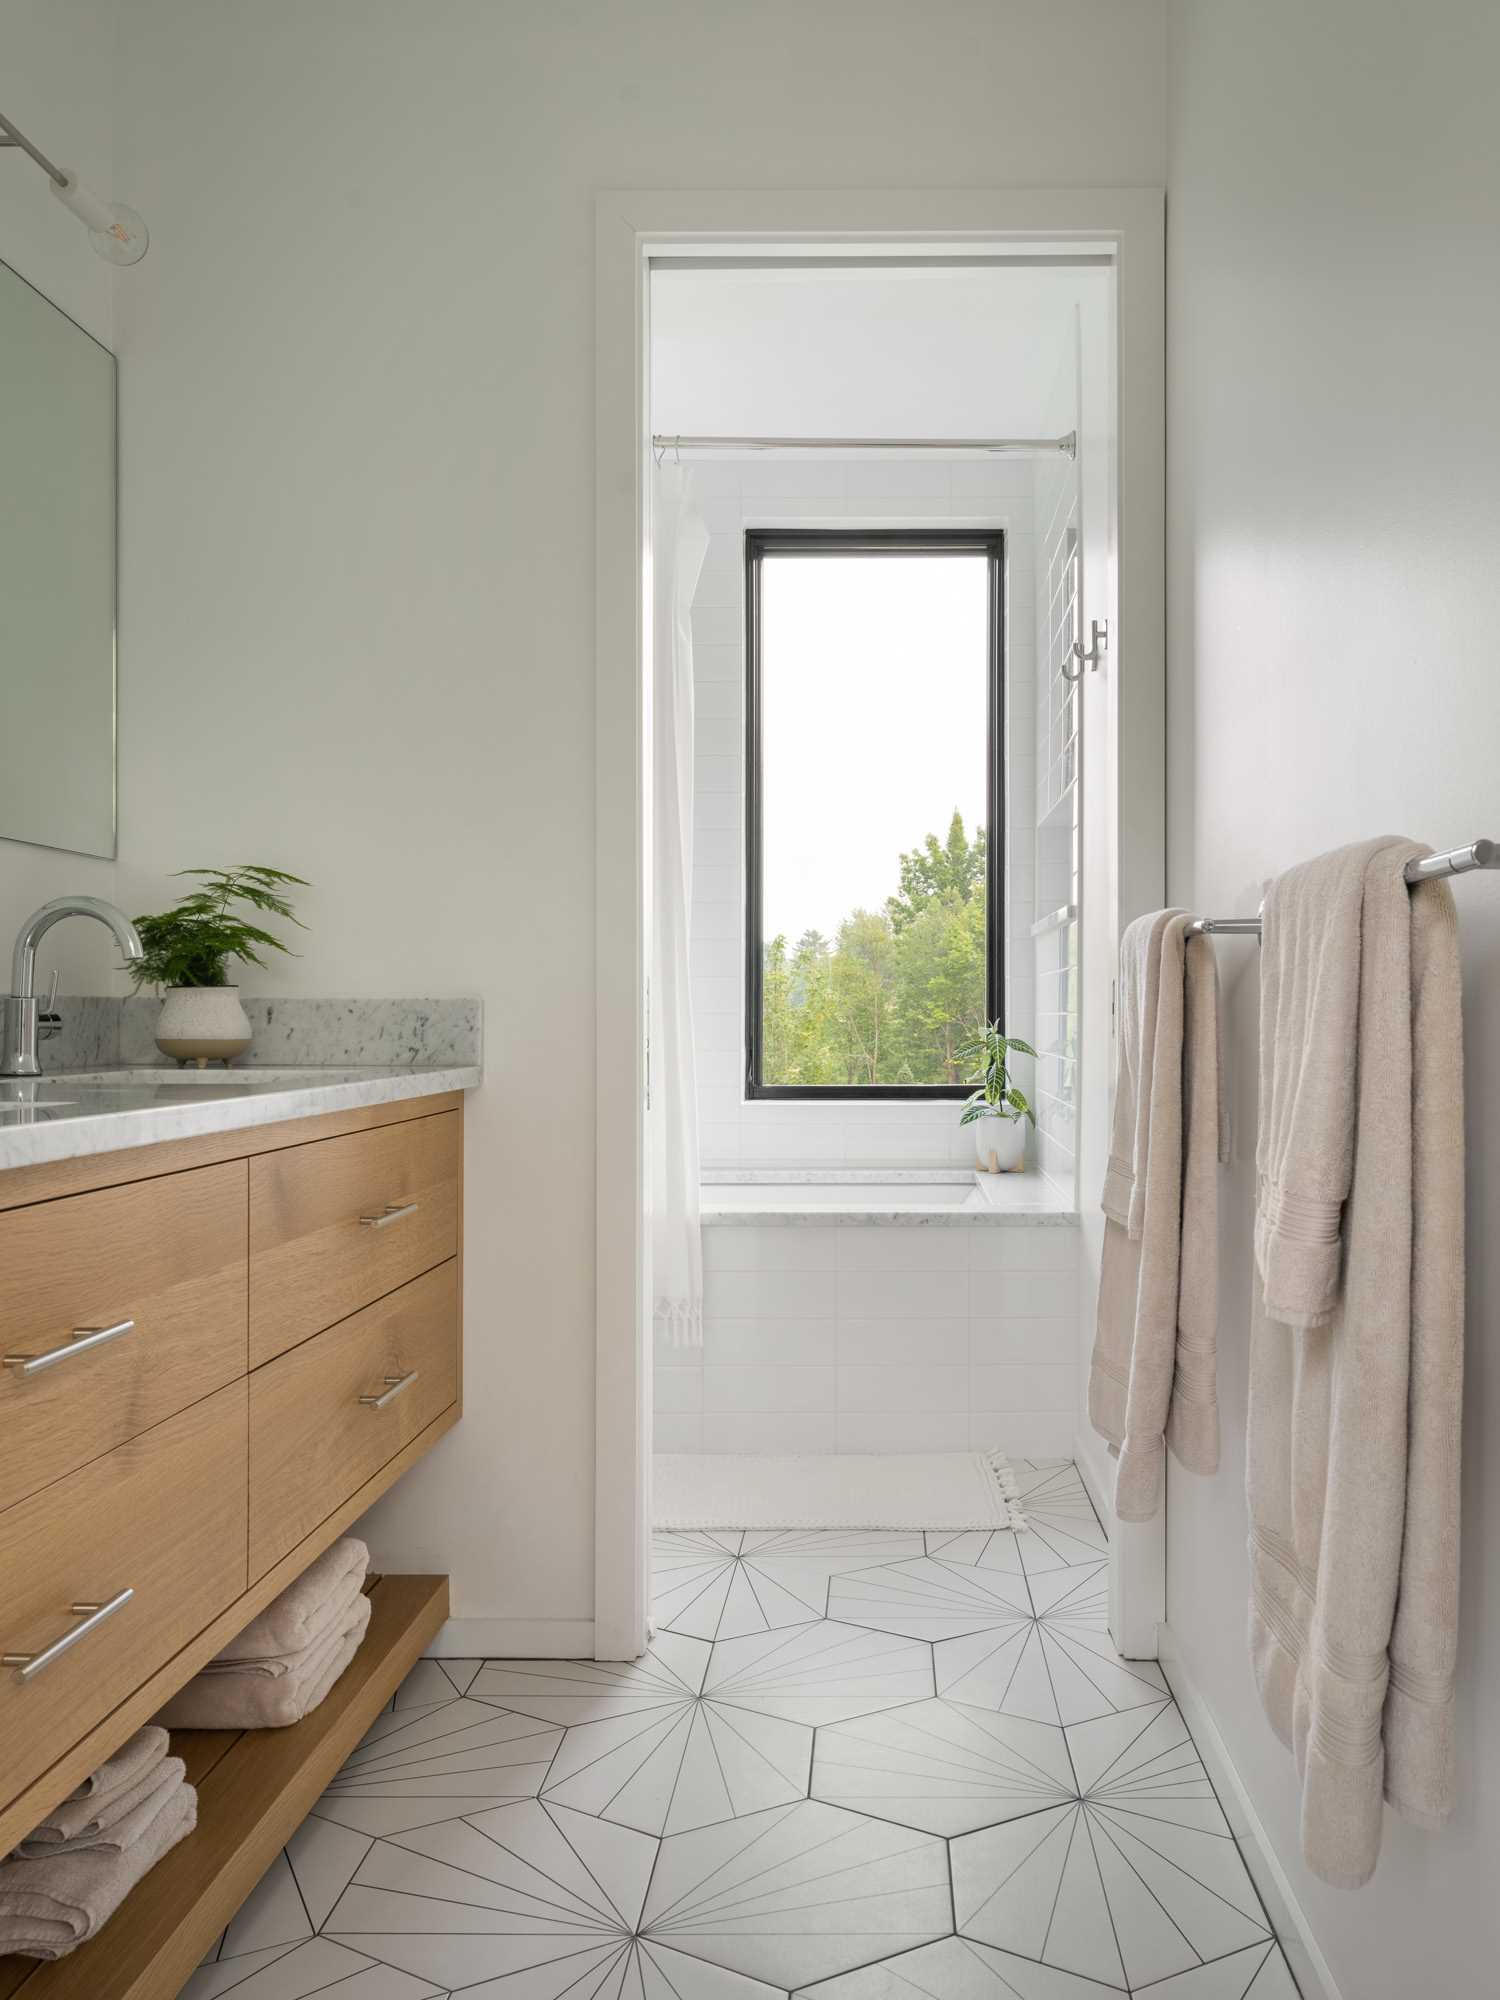 A modern bathroom with white walls, wood vanity, and light starburst tile flooring.